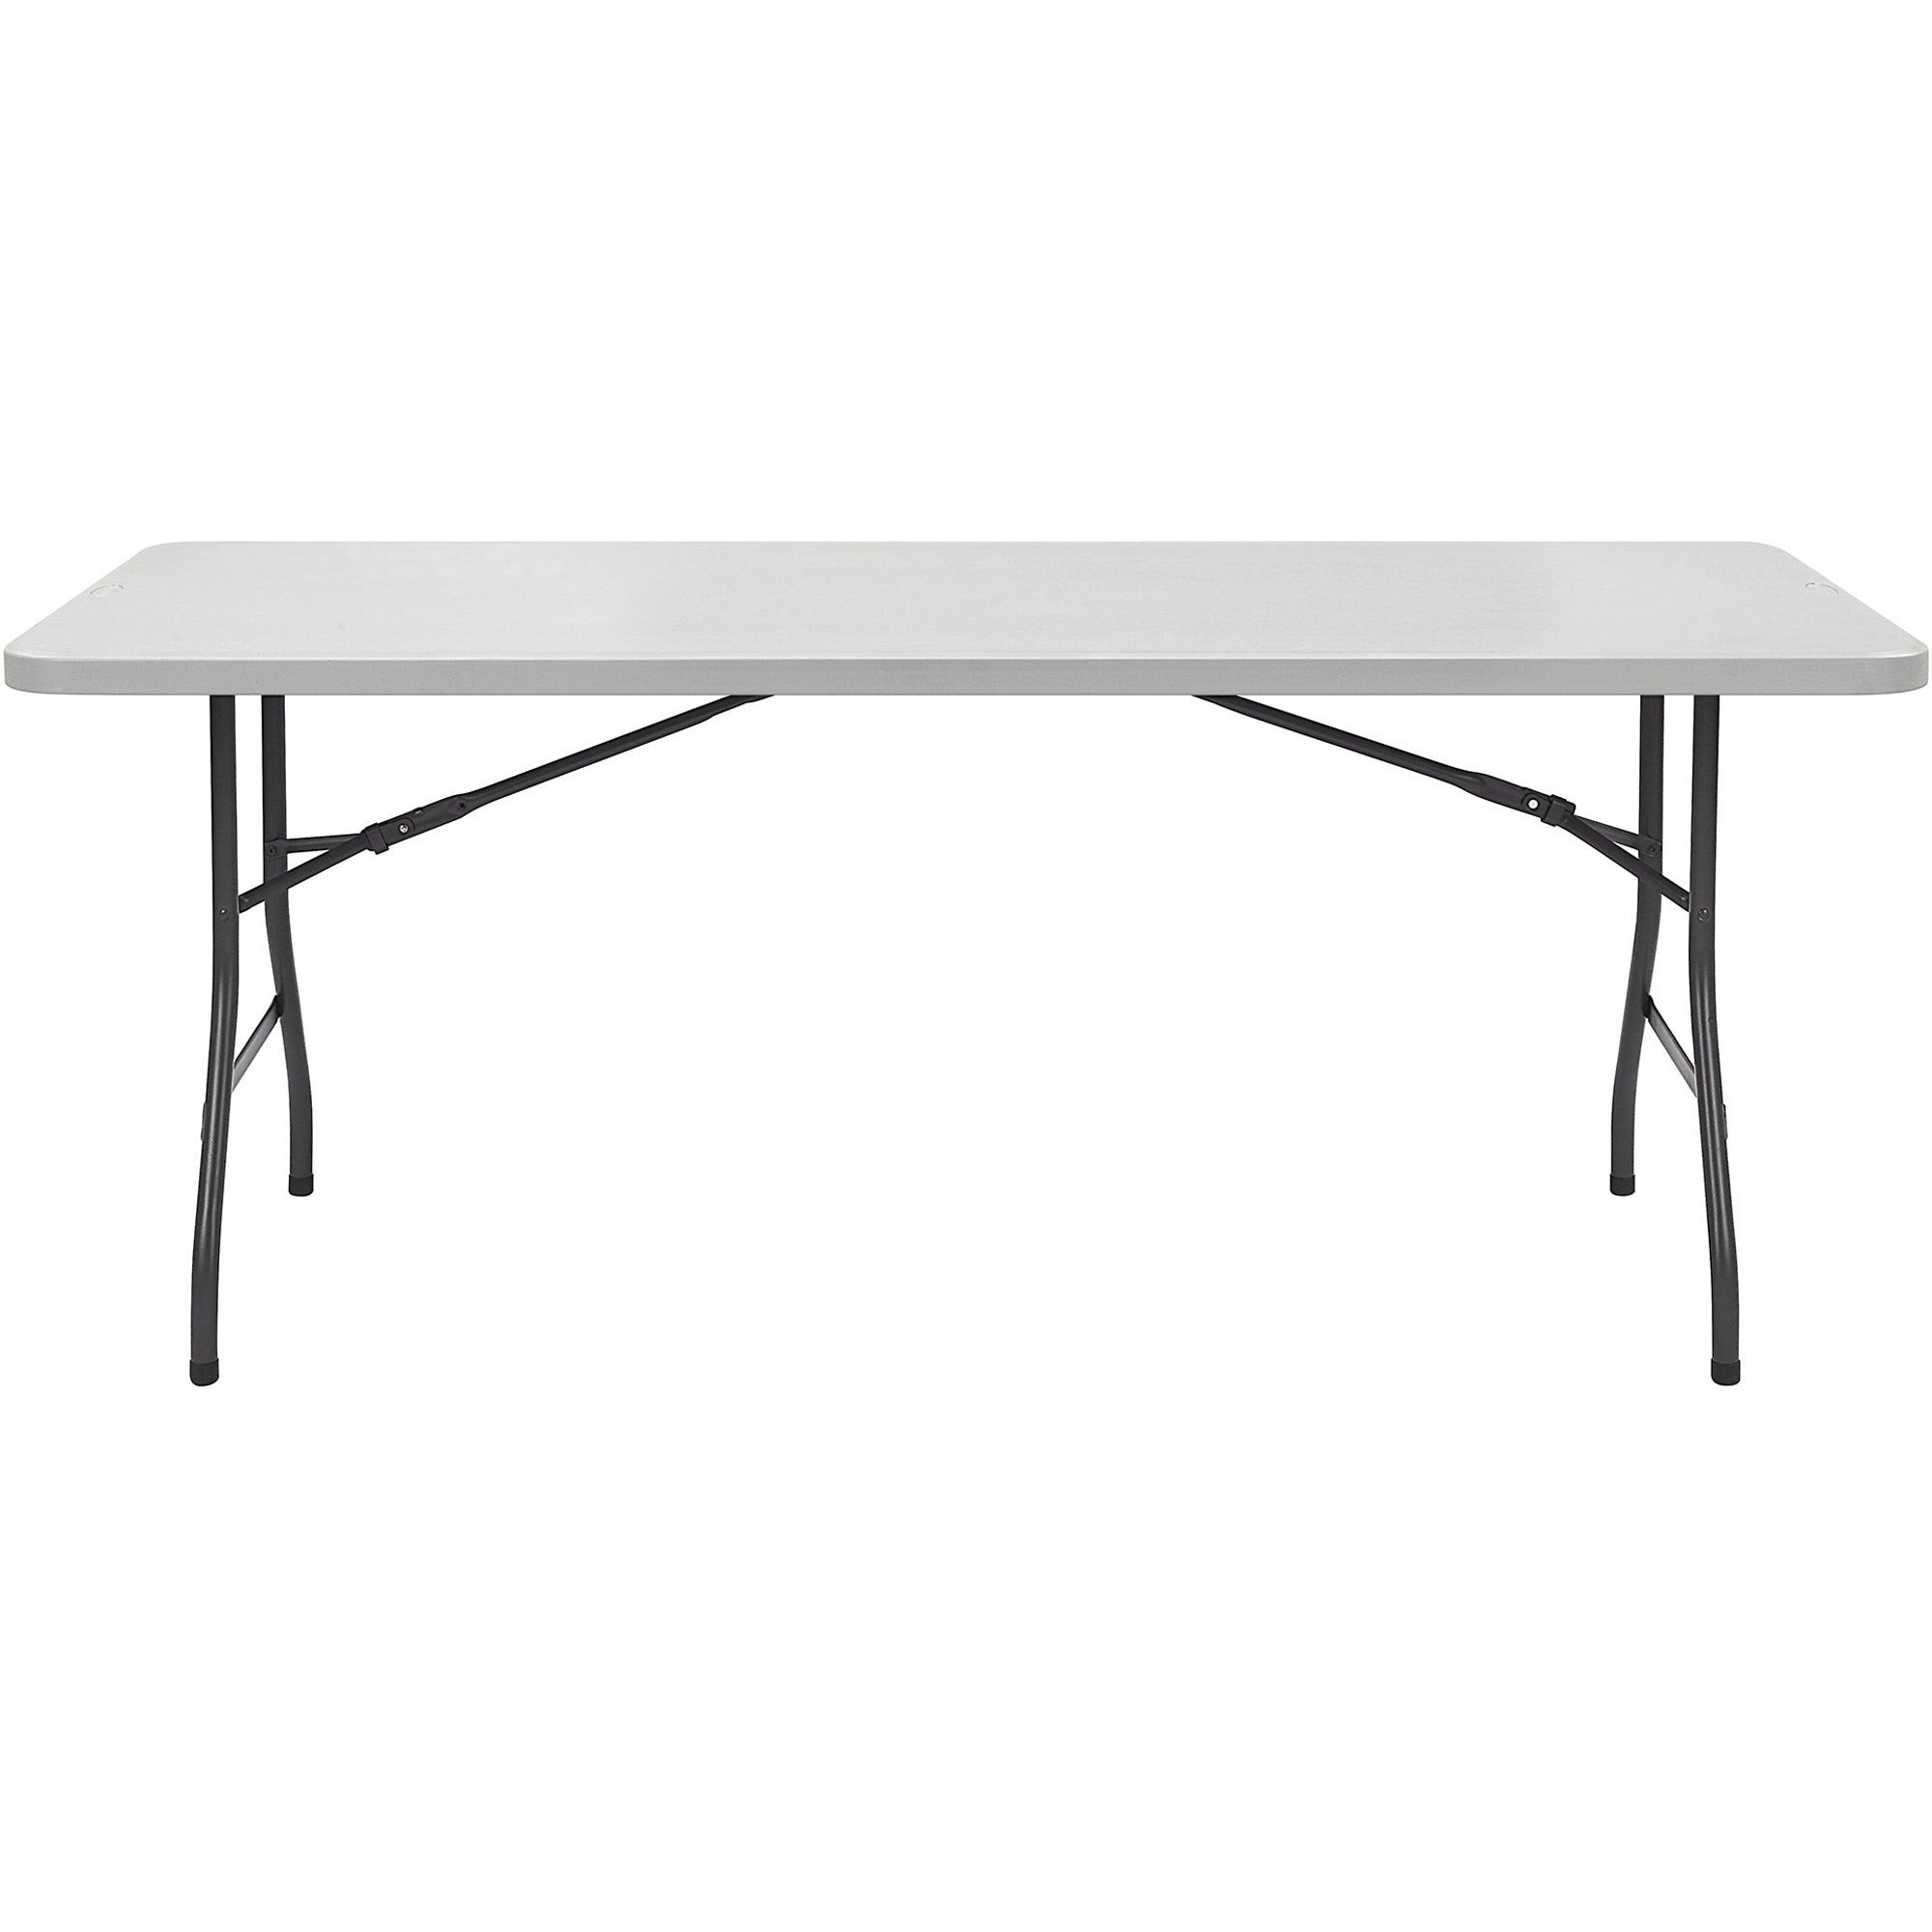 lorell-ultra-lite-banquet-table-for-table-toplight-gray-rectangle-top-dark-gray-base-600-lb-capacity-x-96-table-top-width-x-30-table-top-depth-x-2-table-top-thickness-29-height-gray-1-each_llr66654 - 3